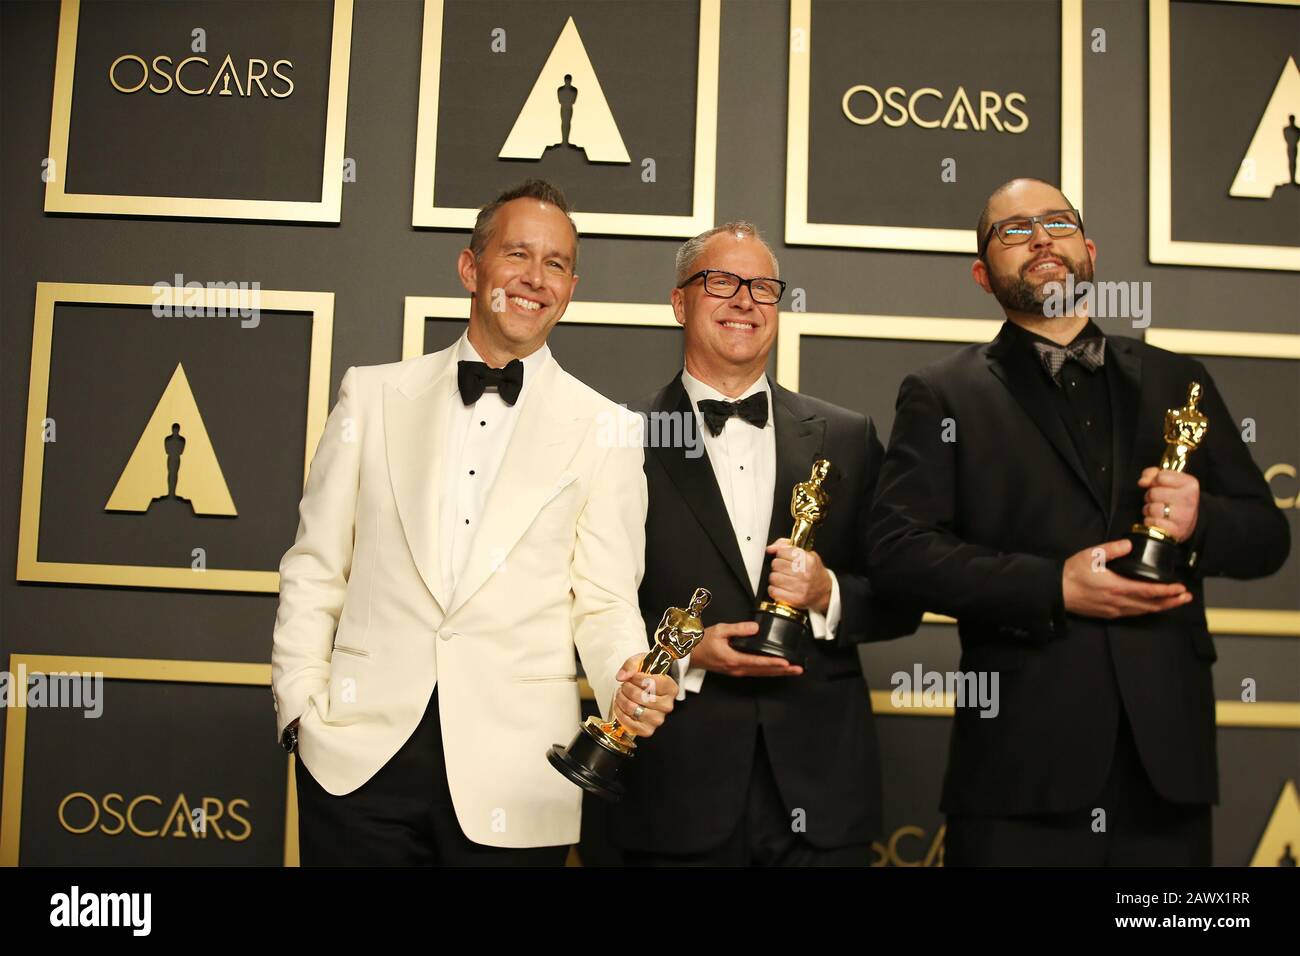 Los Angeles, USA. 9th Feb, 2020. (From L to R)Jonas Rivera, Mark Nielsen and Josh Cooley pose for photos after winning the Best Animated Feature Film award for 'Toy Story 4' at the 92nd Academy Awards ceremony at the Dolby Theatre in Los Angeles, the United States, Feb. 9, 2020. Credit: Li Ying/Xinhua/Alamy Live News Stock Photo